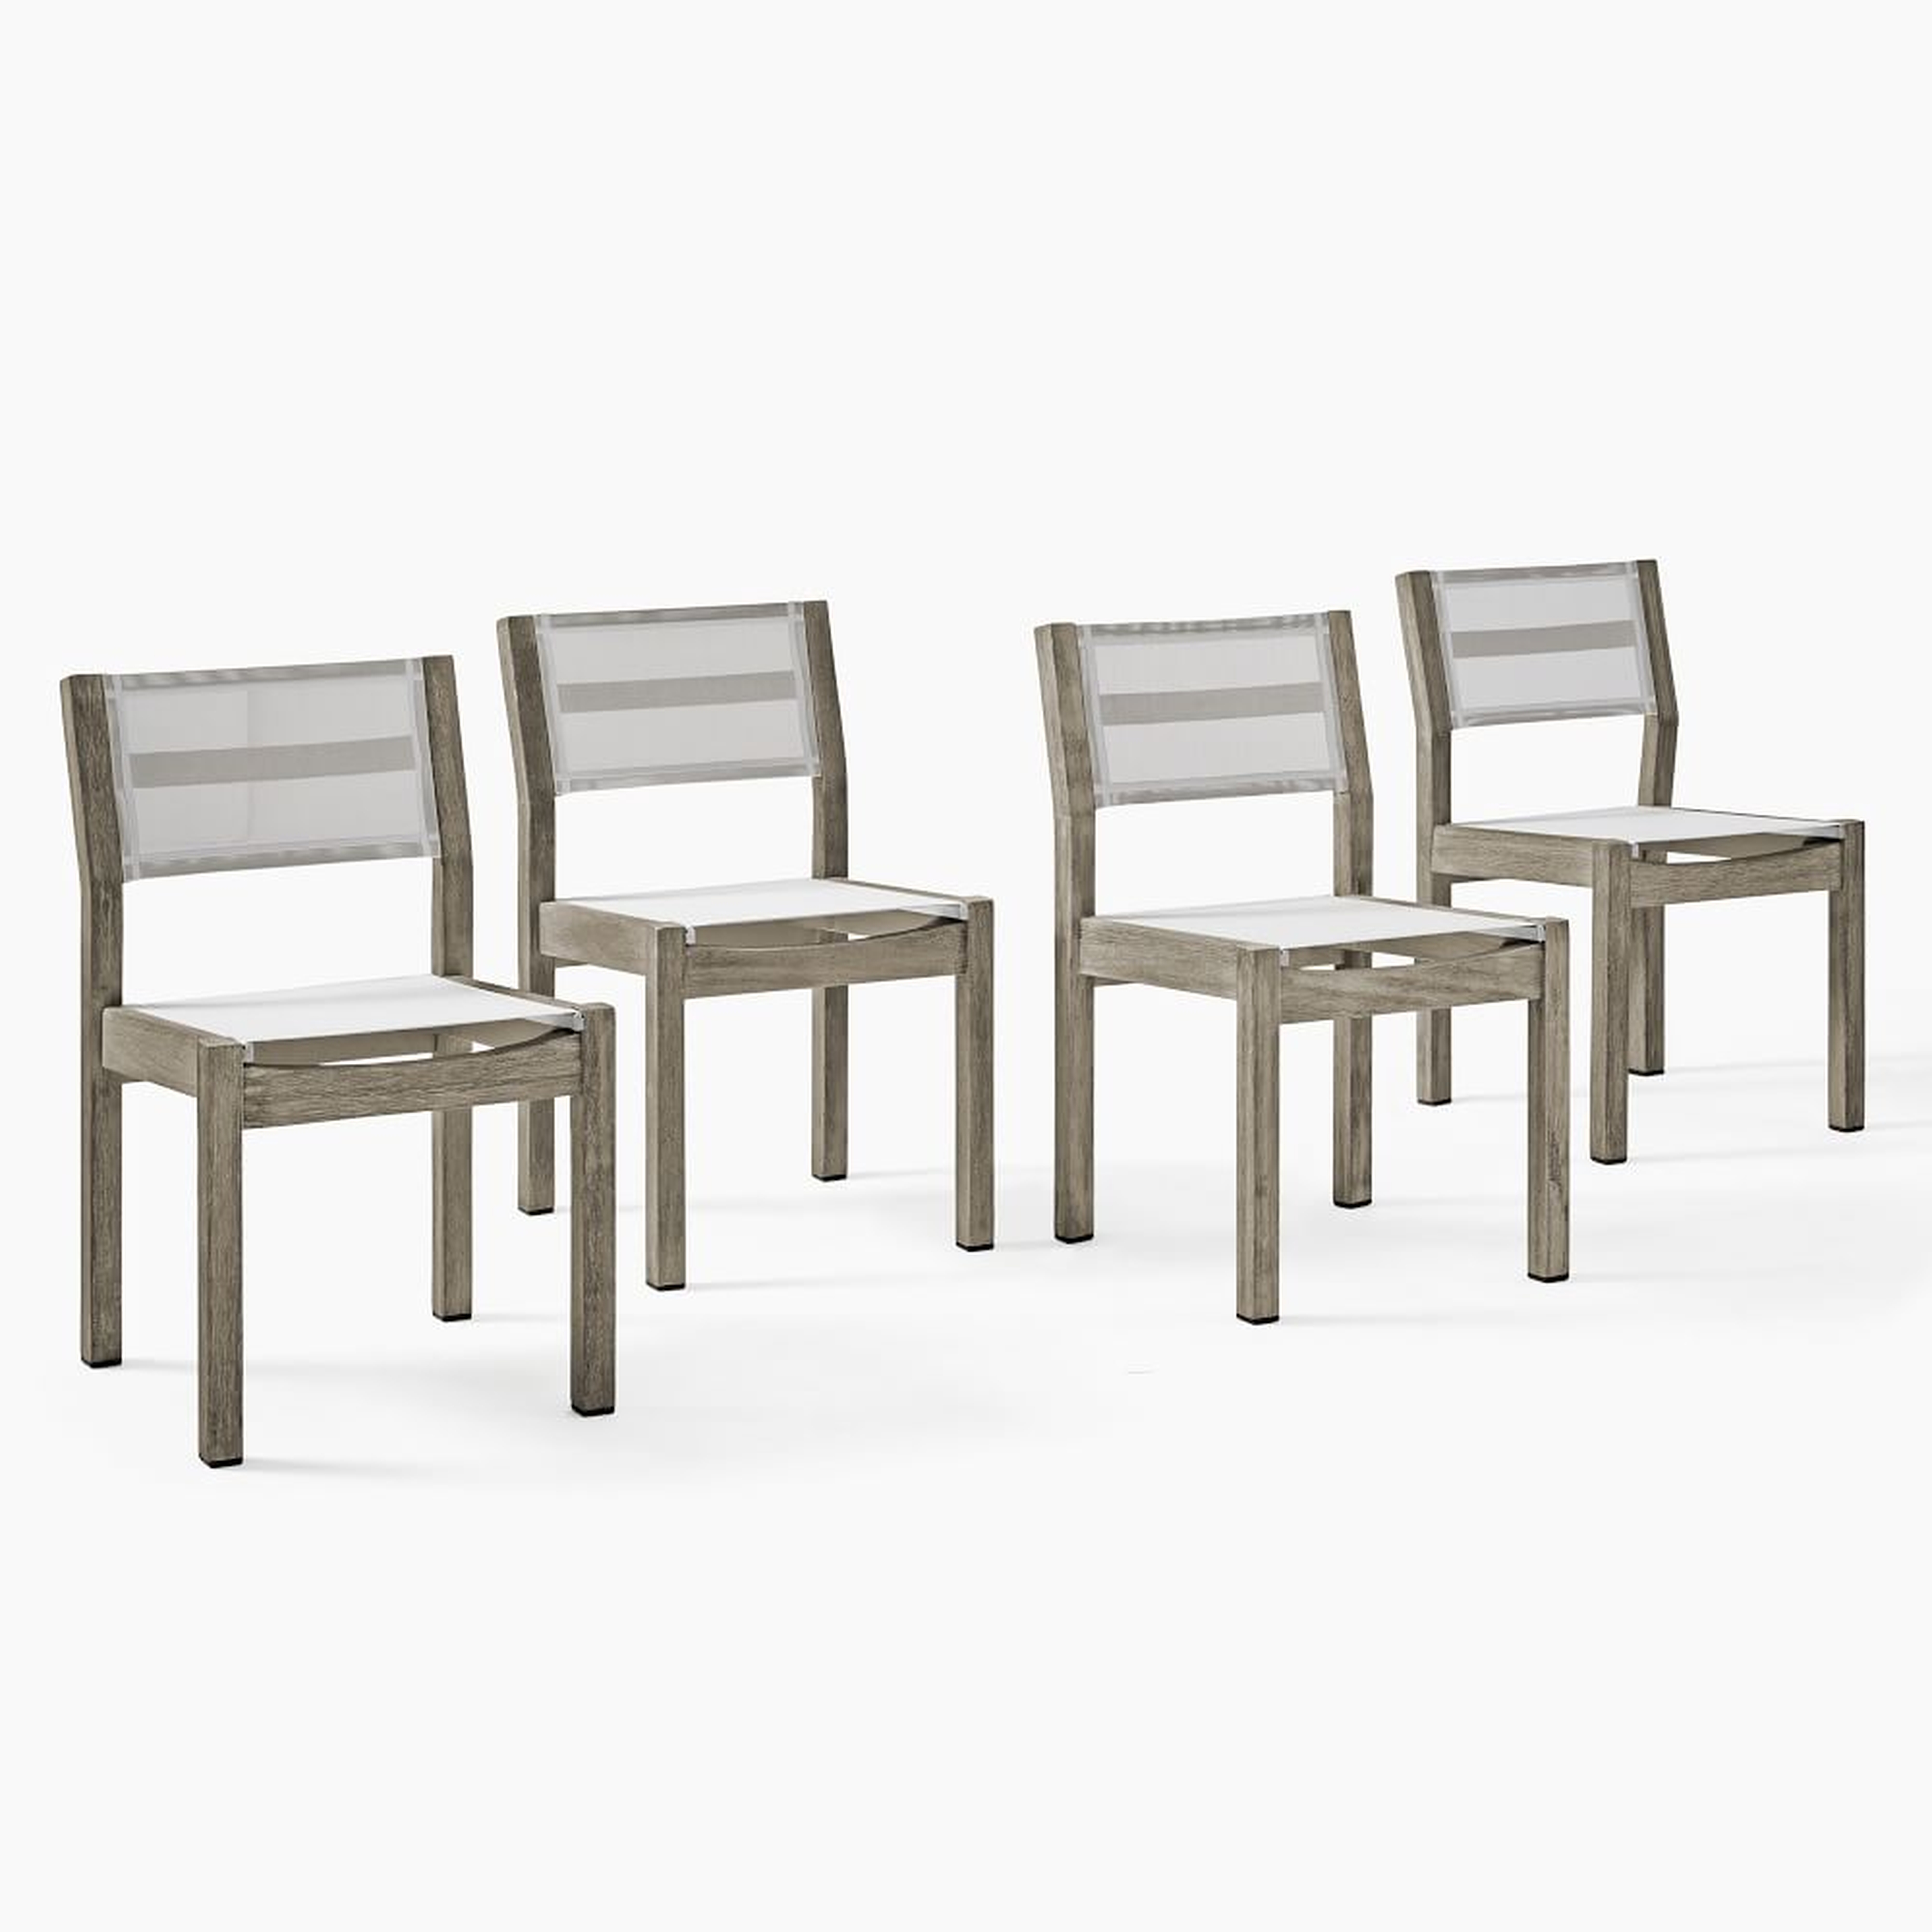 Portside Textiline Dining Chair, Set of 4, Weathered Gray - West Elm